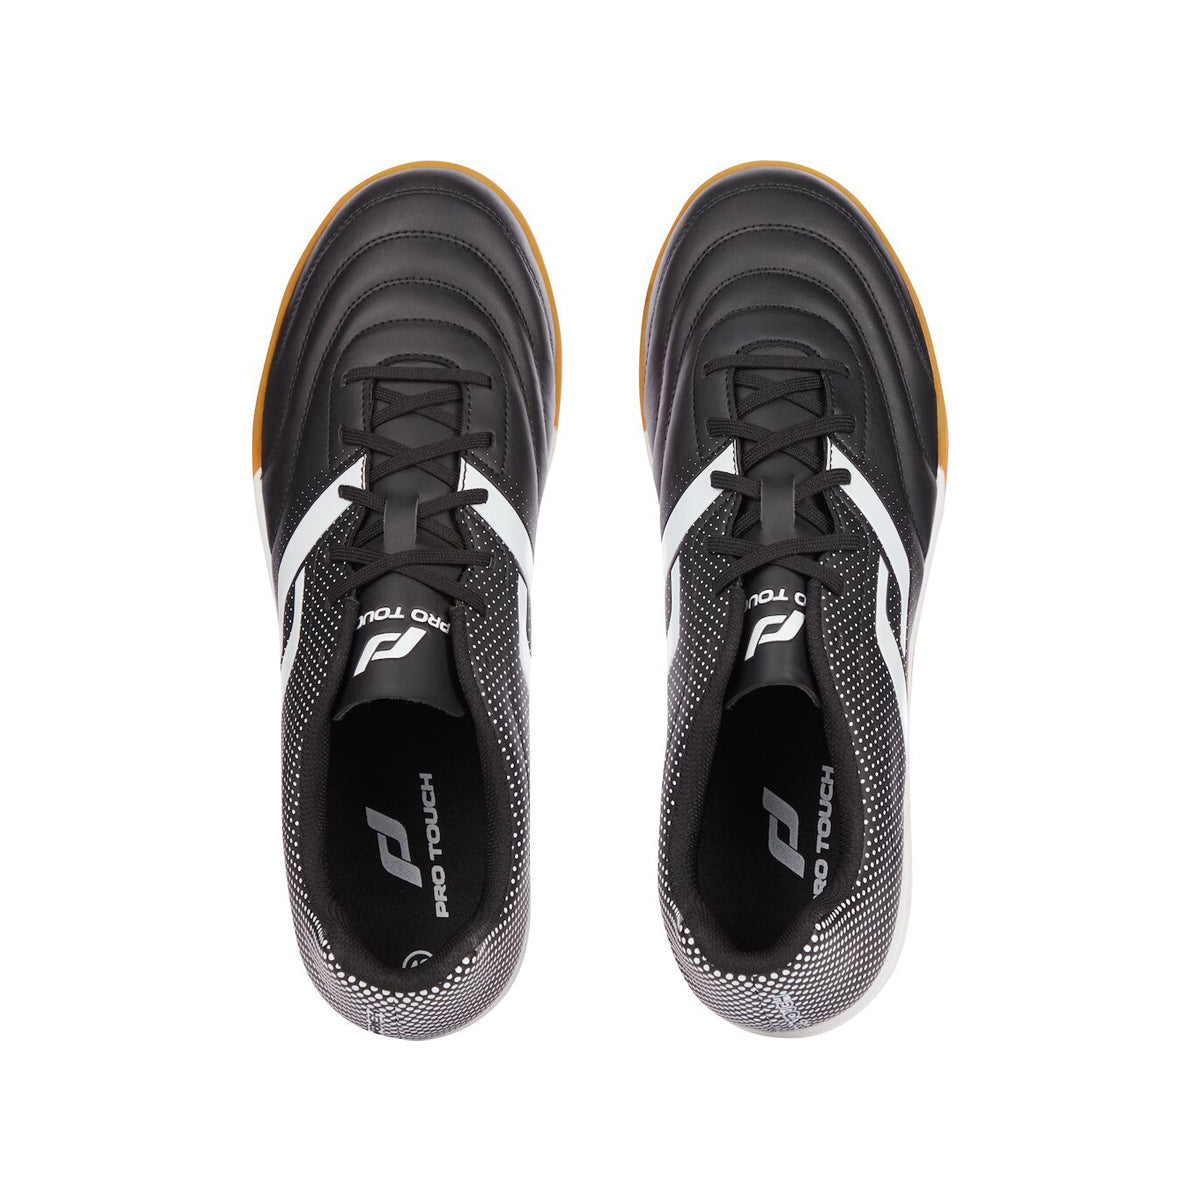 Pro Touch Classic Football Indoor Shoes For Men, Black & White